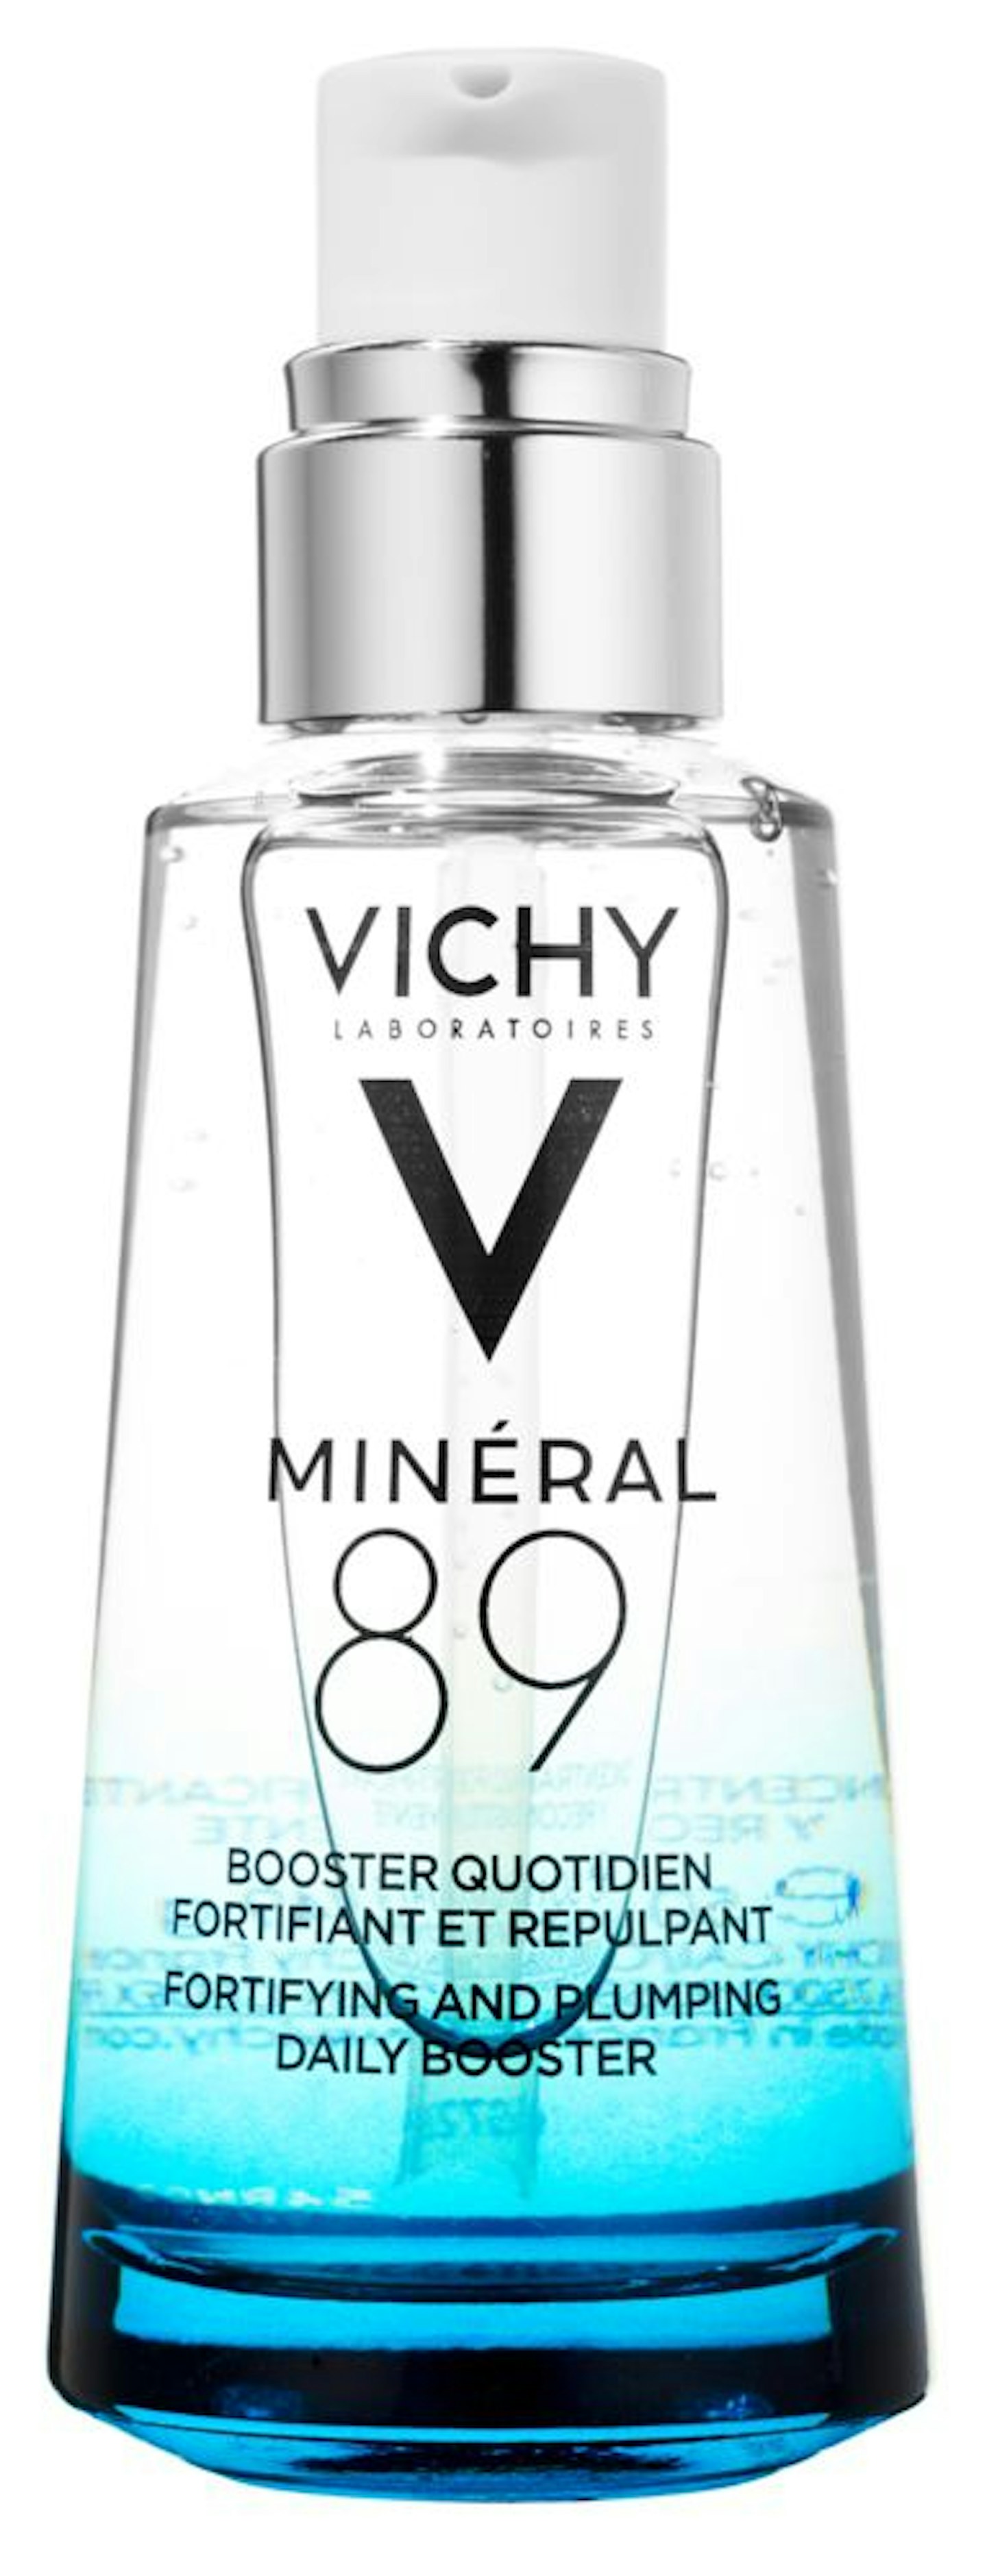 Vichy Mineral 89 Fortifying and Plumping Daily Booster, £22.